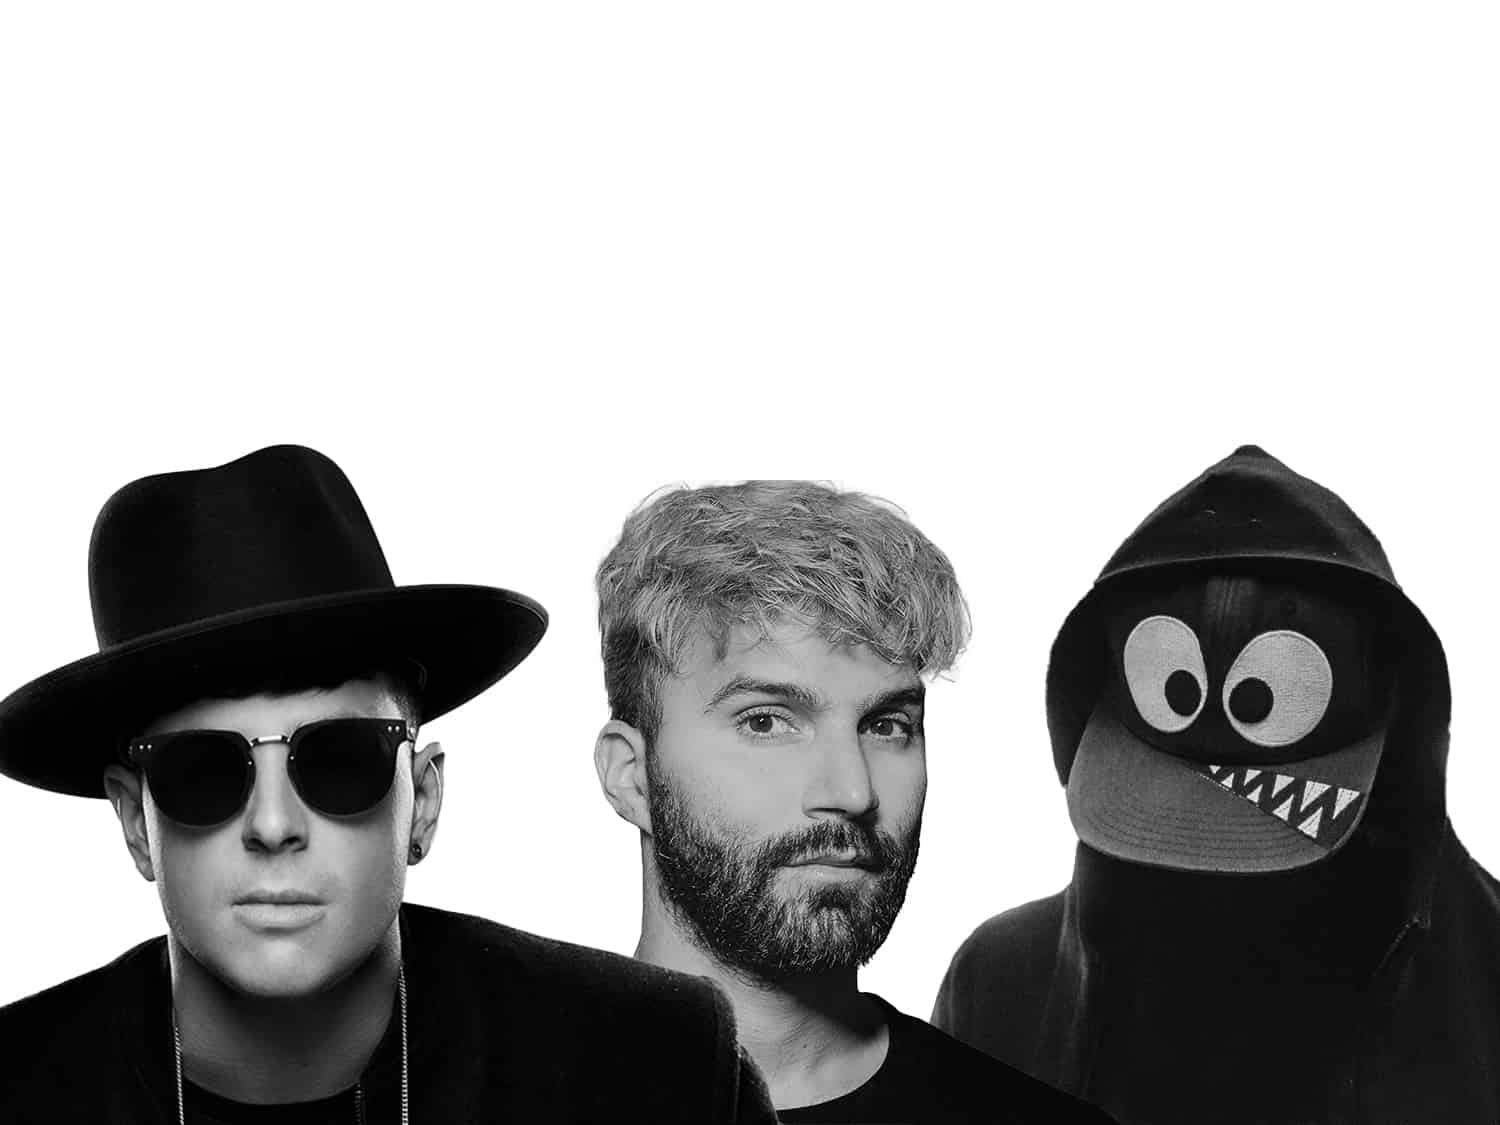 Timmy Trumpet & R3HAB team up for remix of 'Dom Dom Yes Yes': Listen - We  Rave You